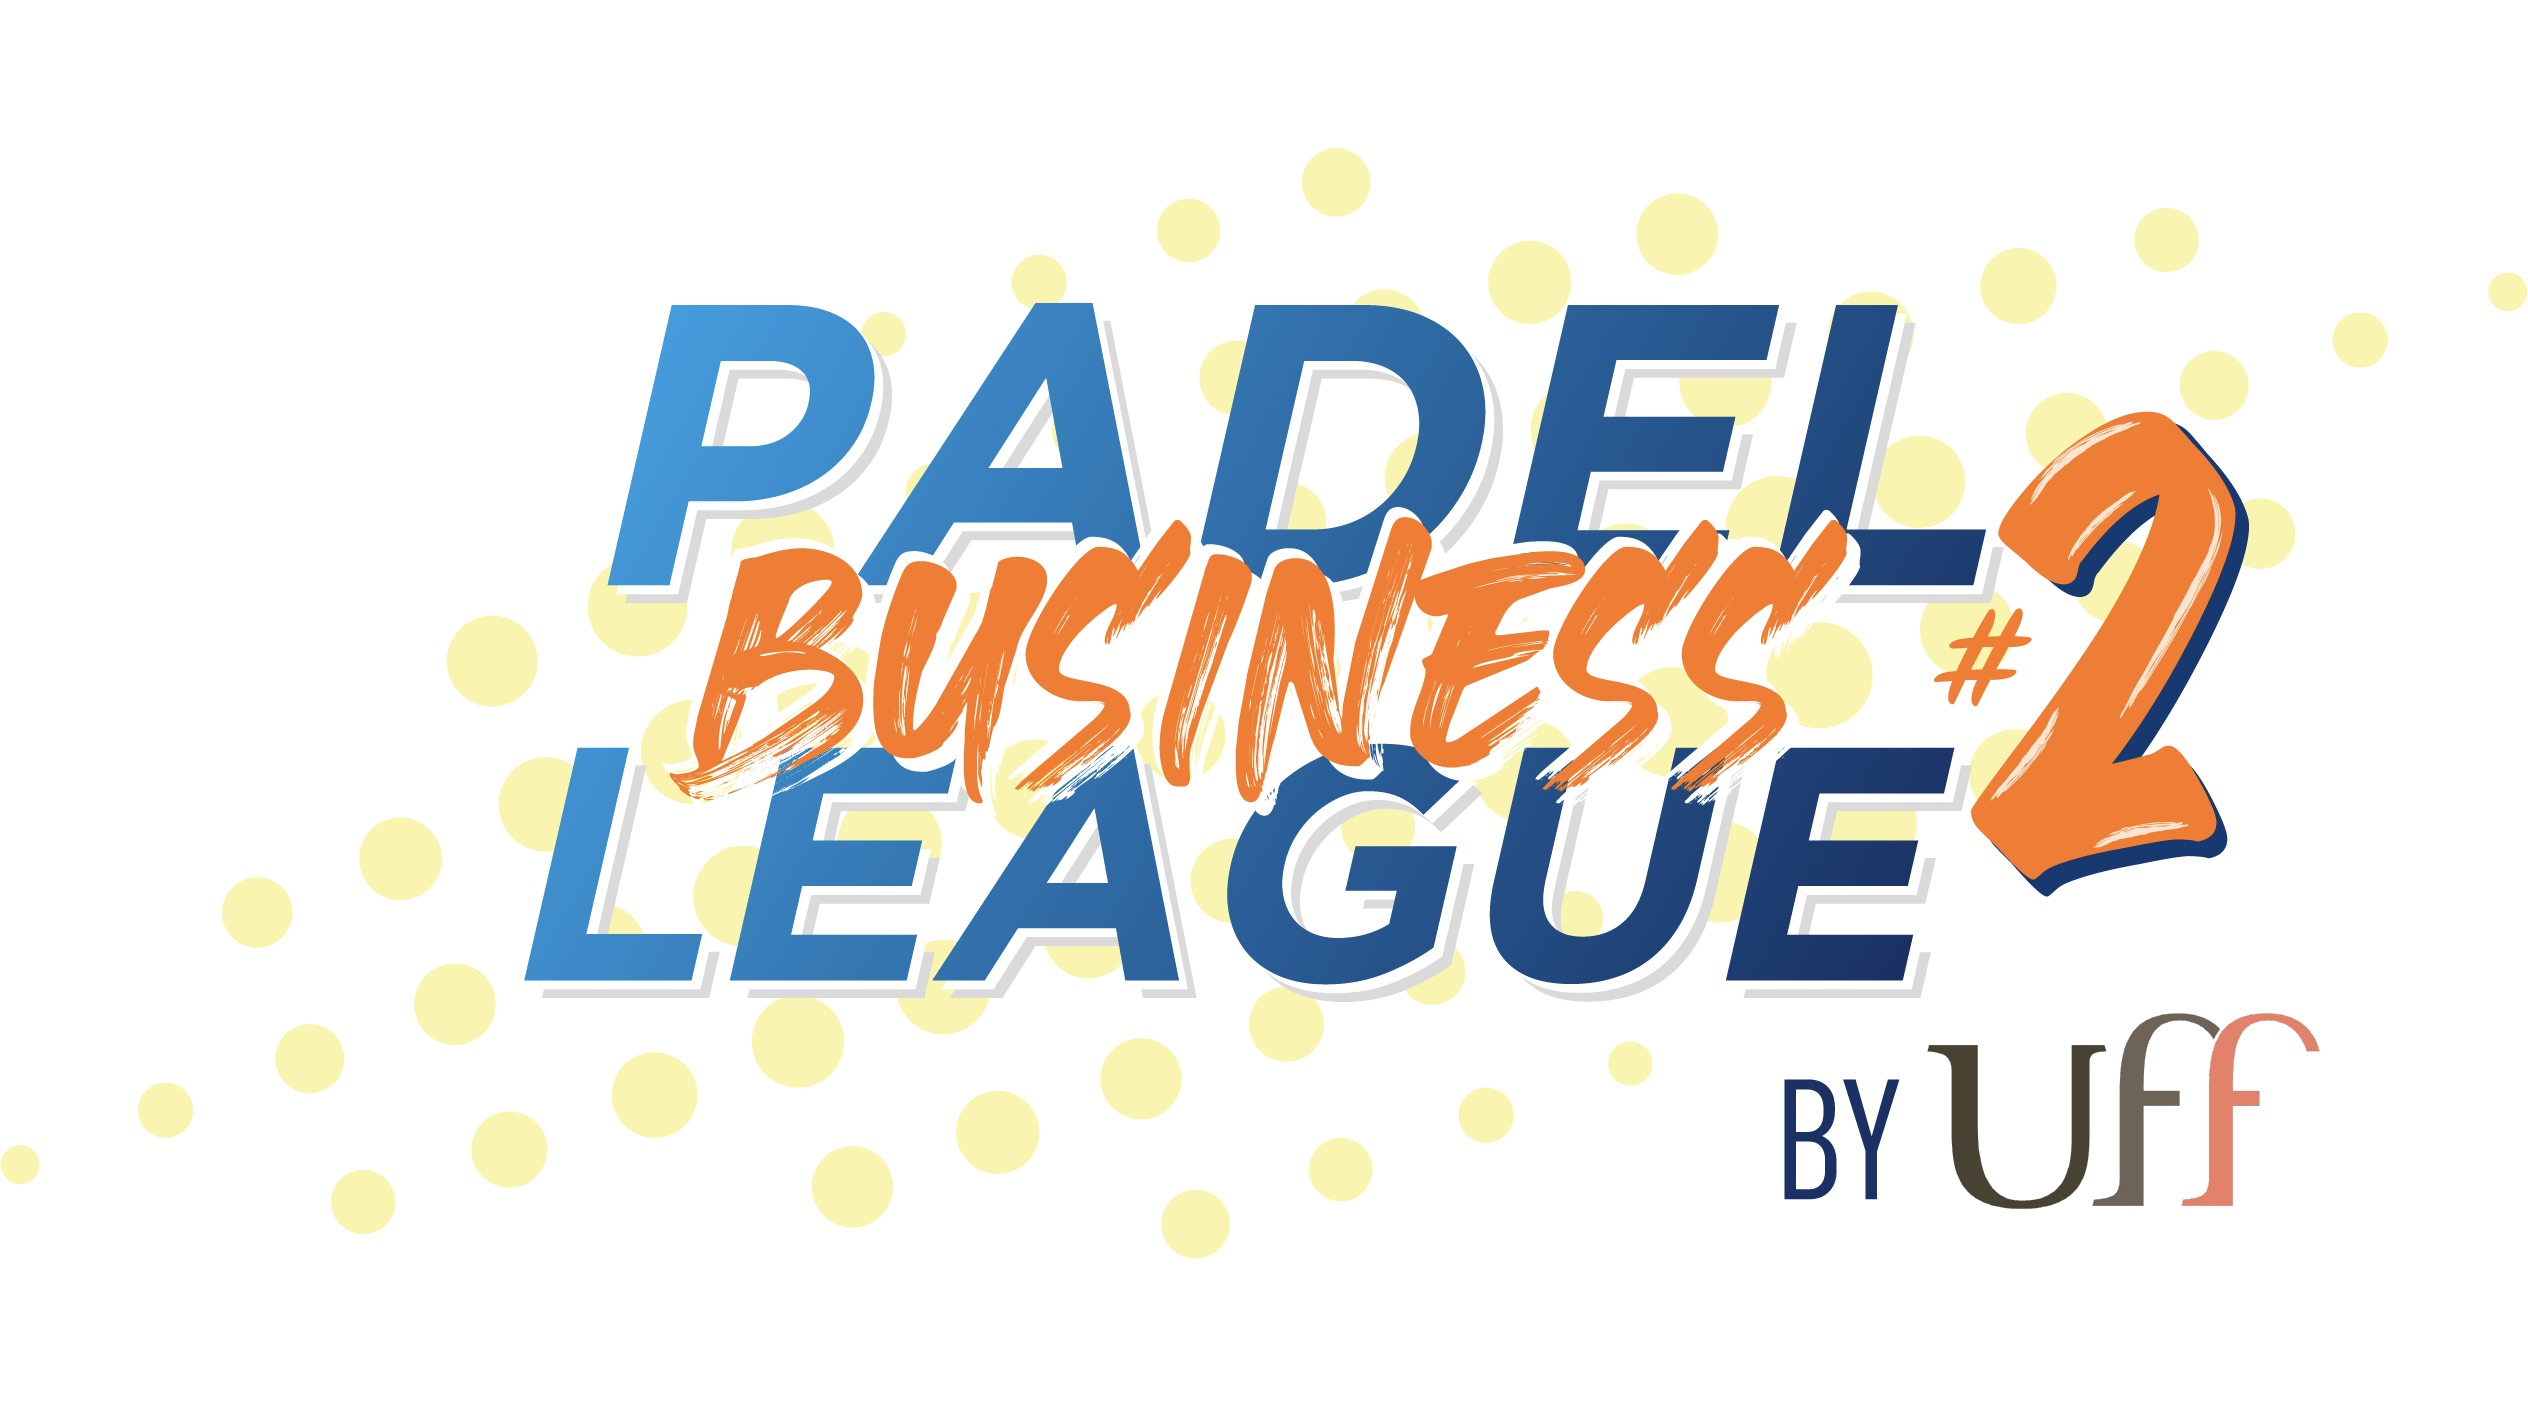 New features for the next edition of the Padel Business League!